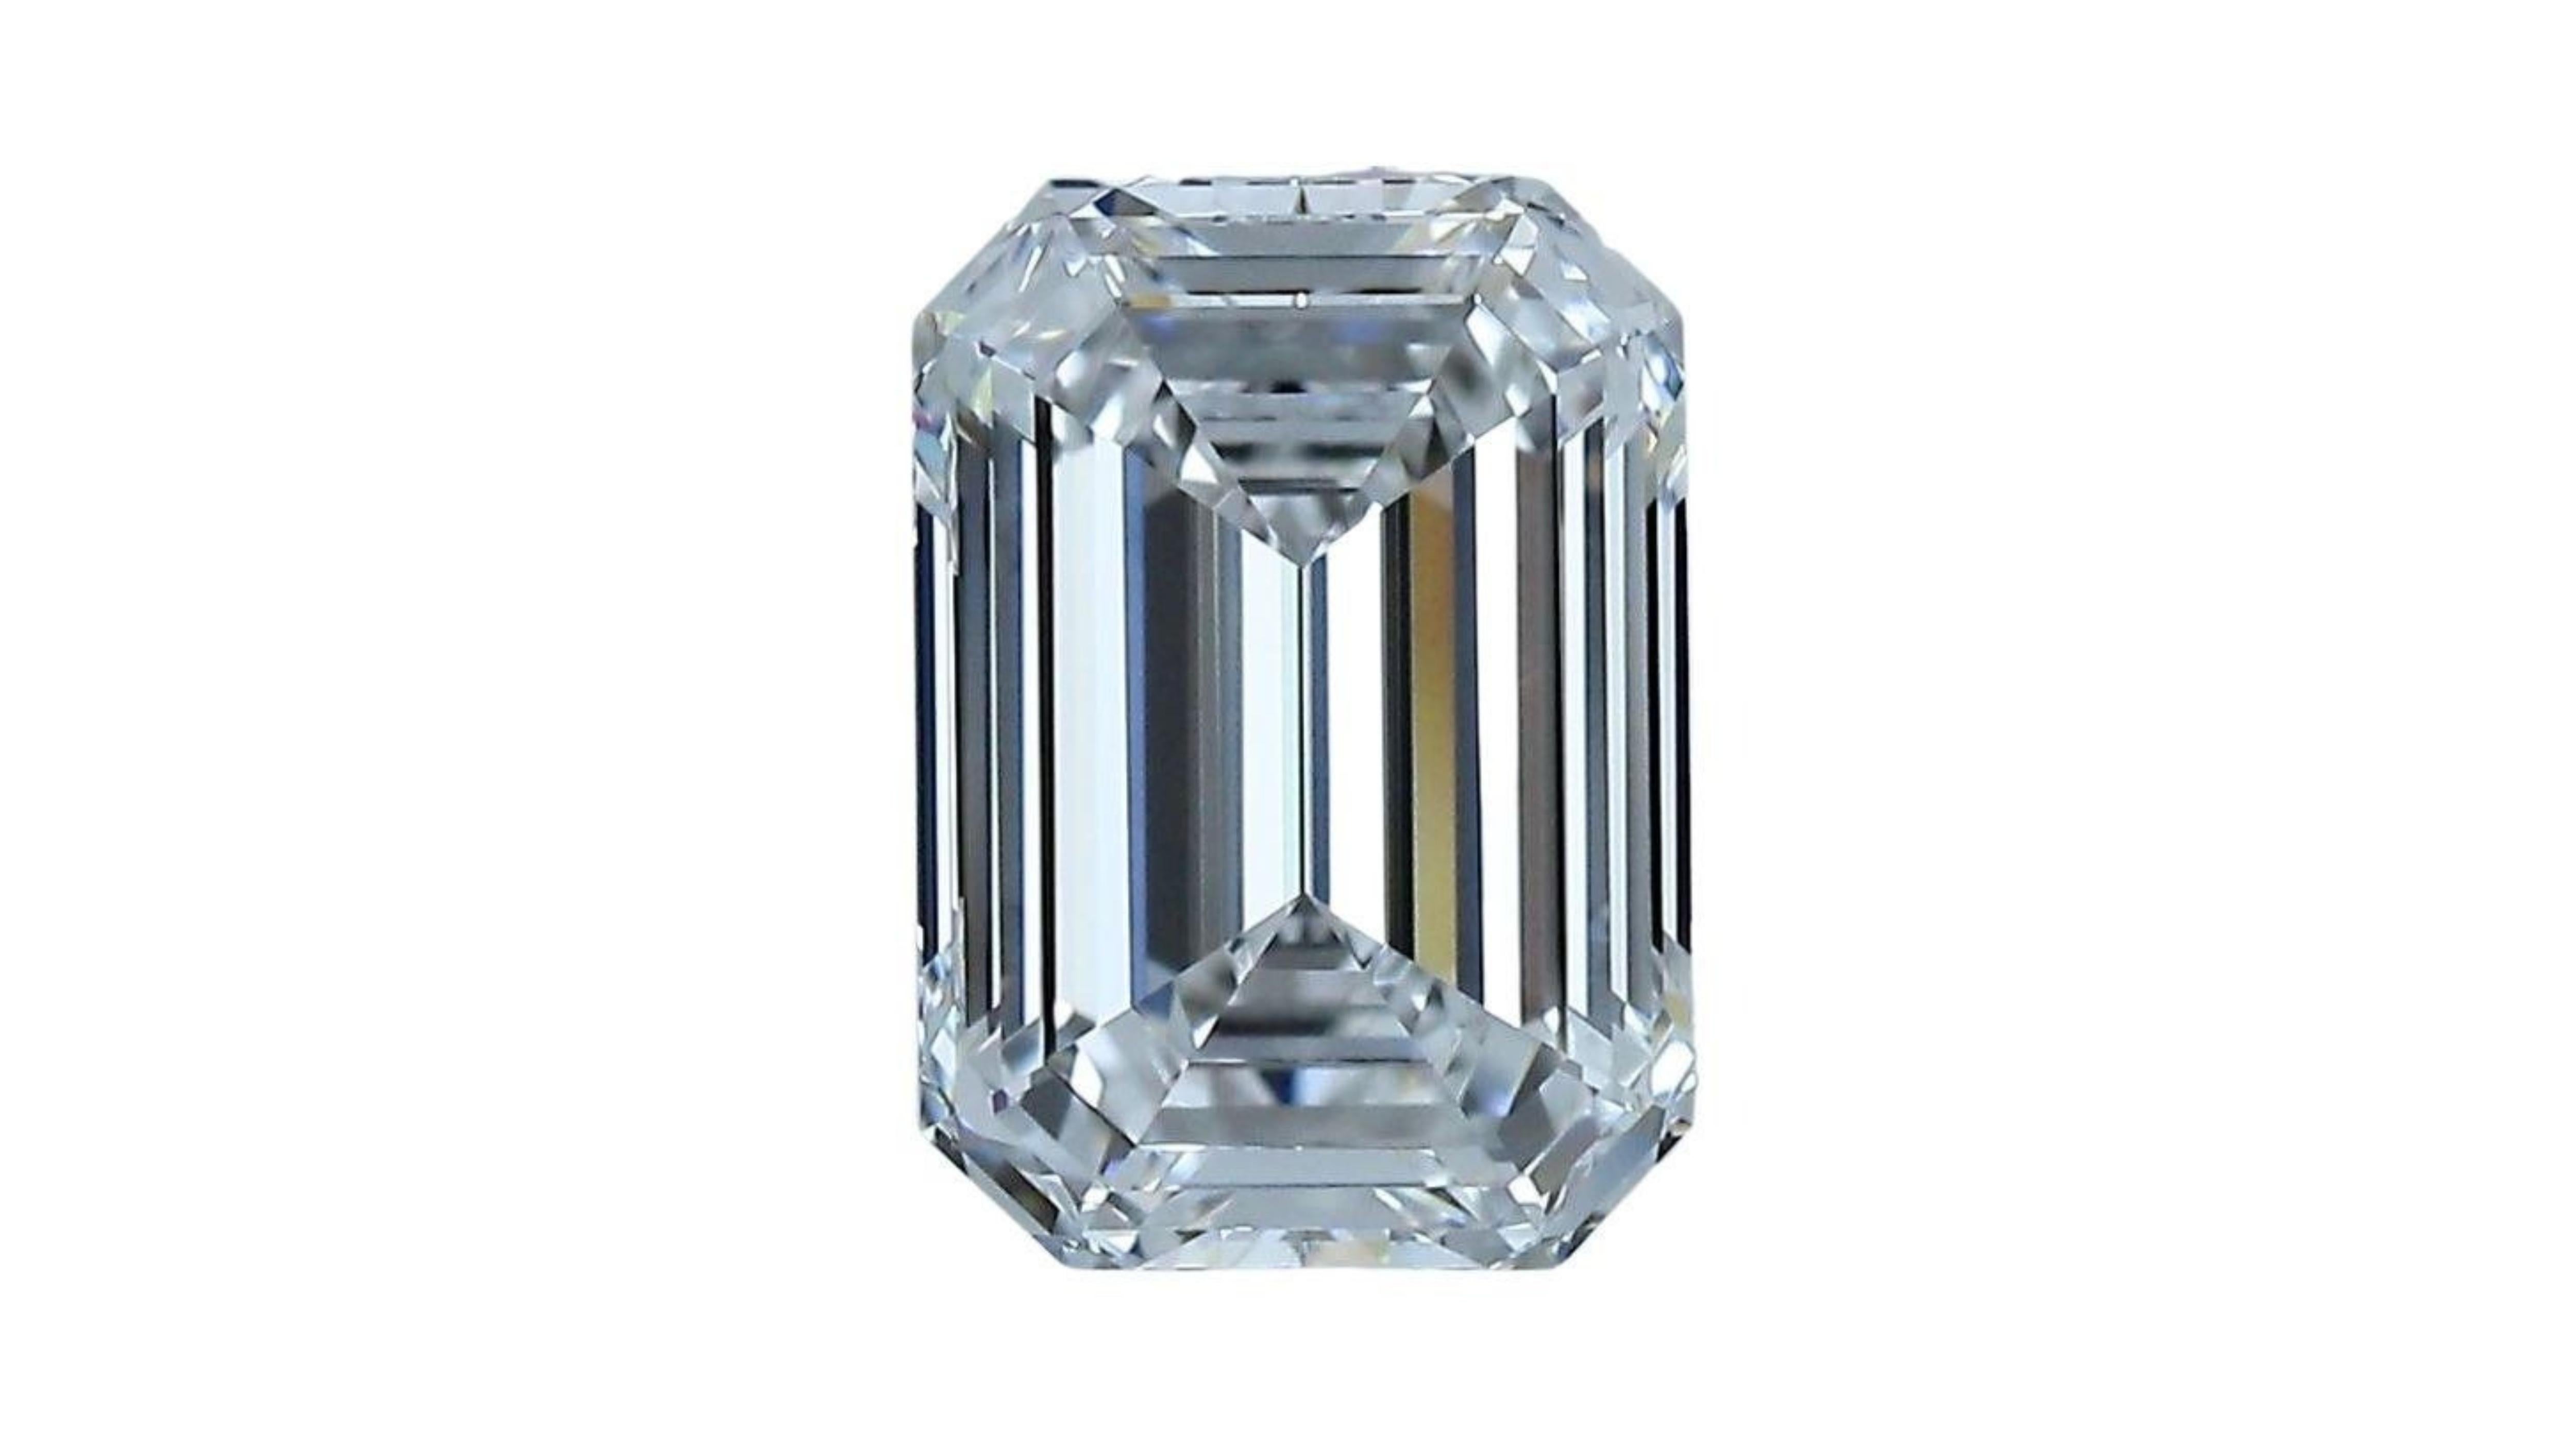 1pc. Shimmering 2.44 Carat Emerald Cut Natural Diamond For Sale 4